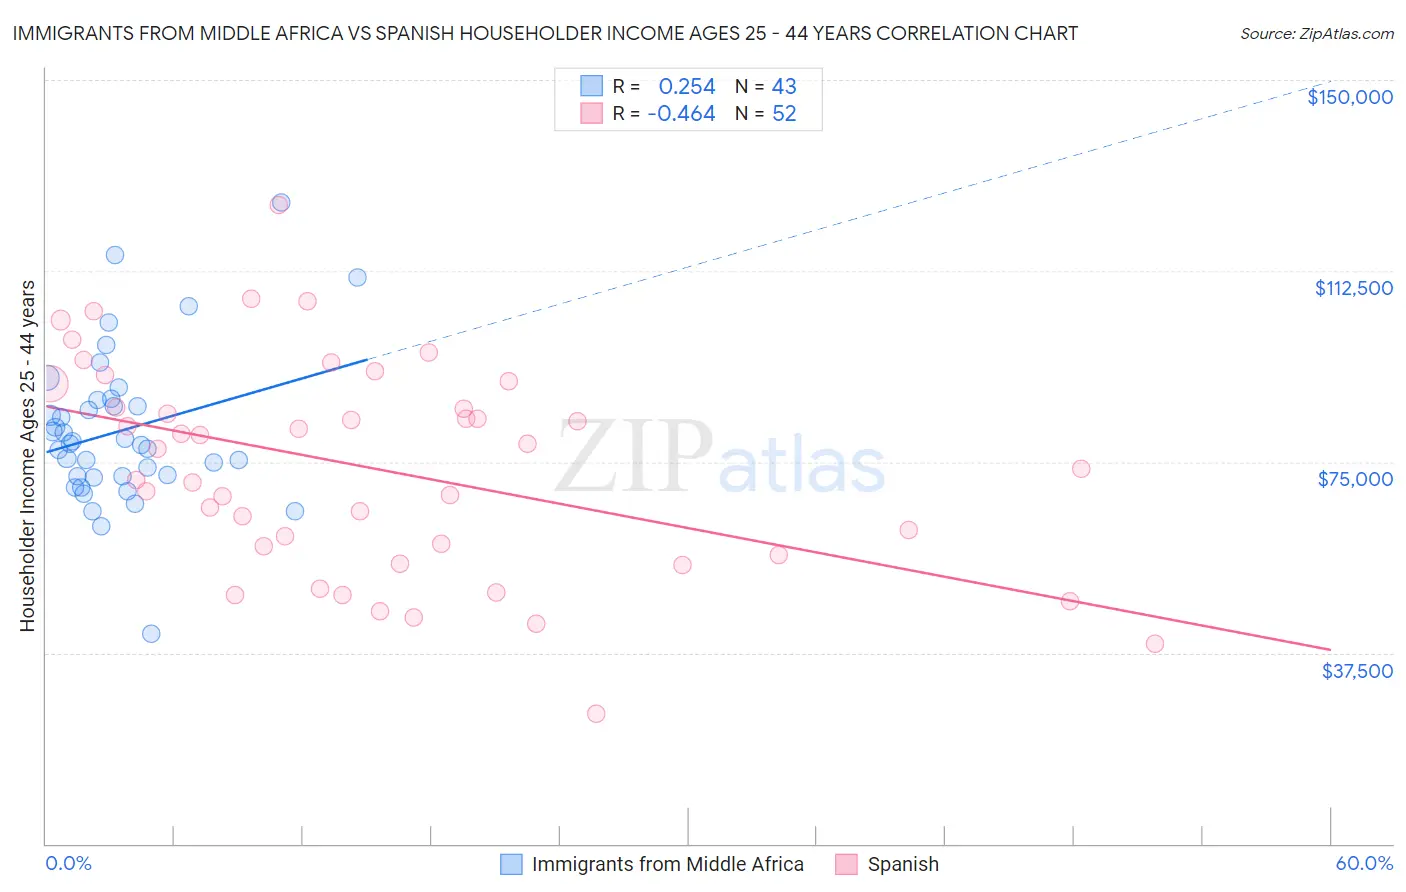 Immigrants from Middle Africa vs Spanish Householder Income Ages 25 - 44 years